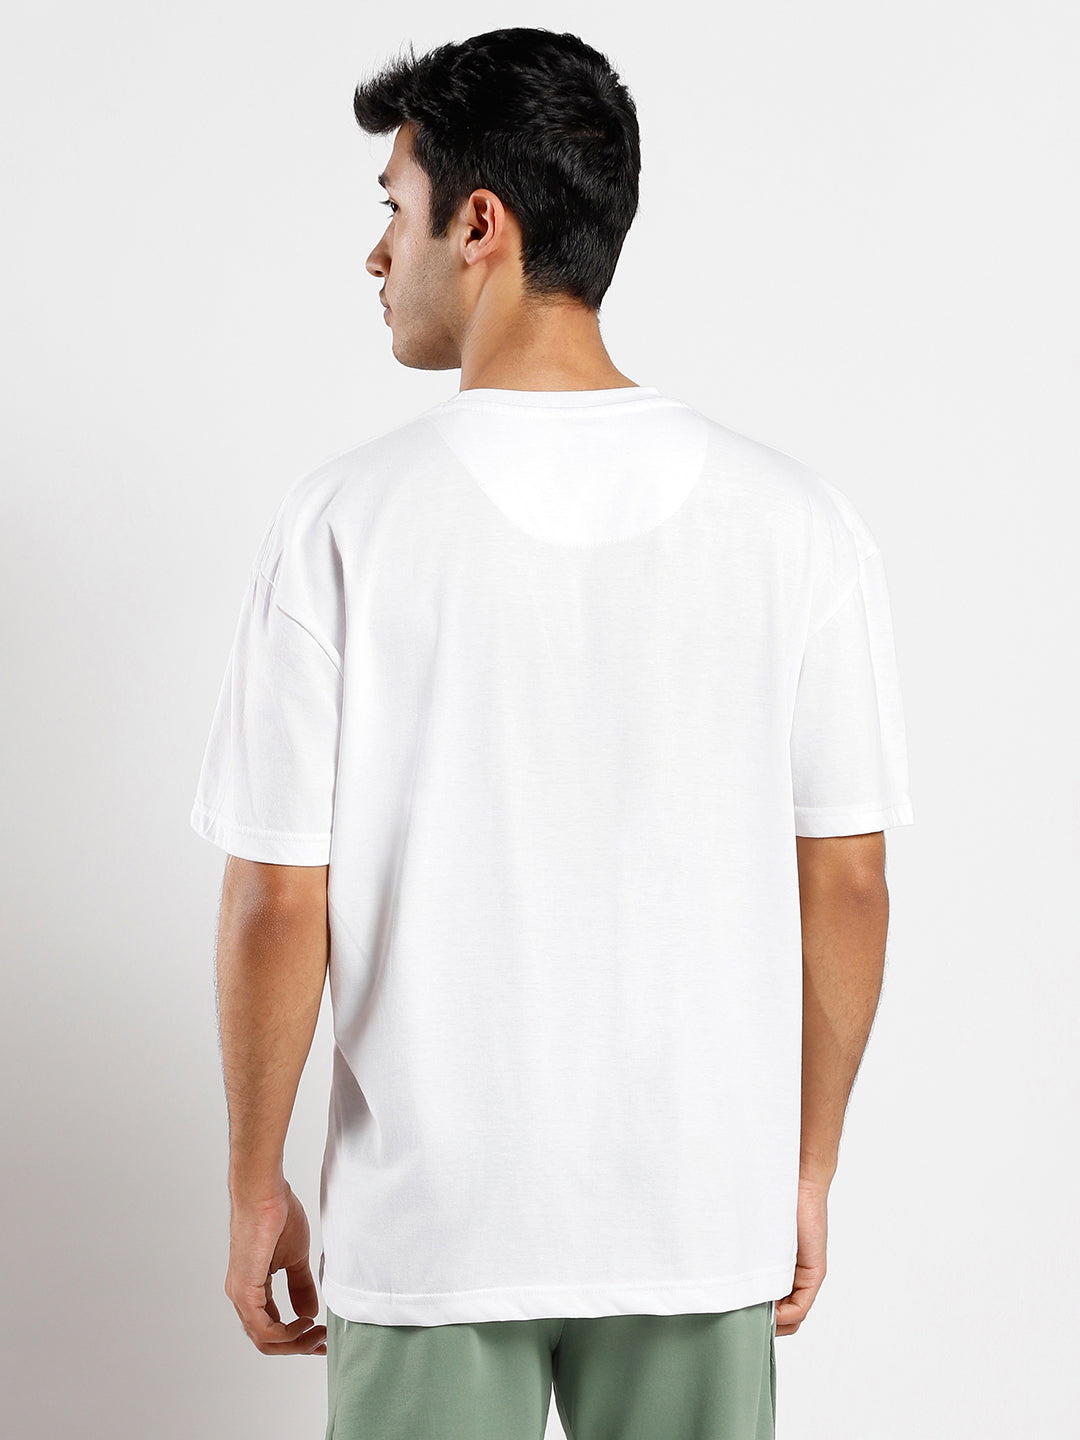 Embossed Oversized Limited Edition T-Shirt